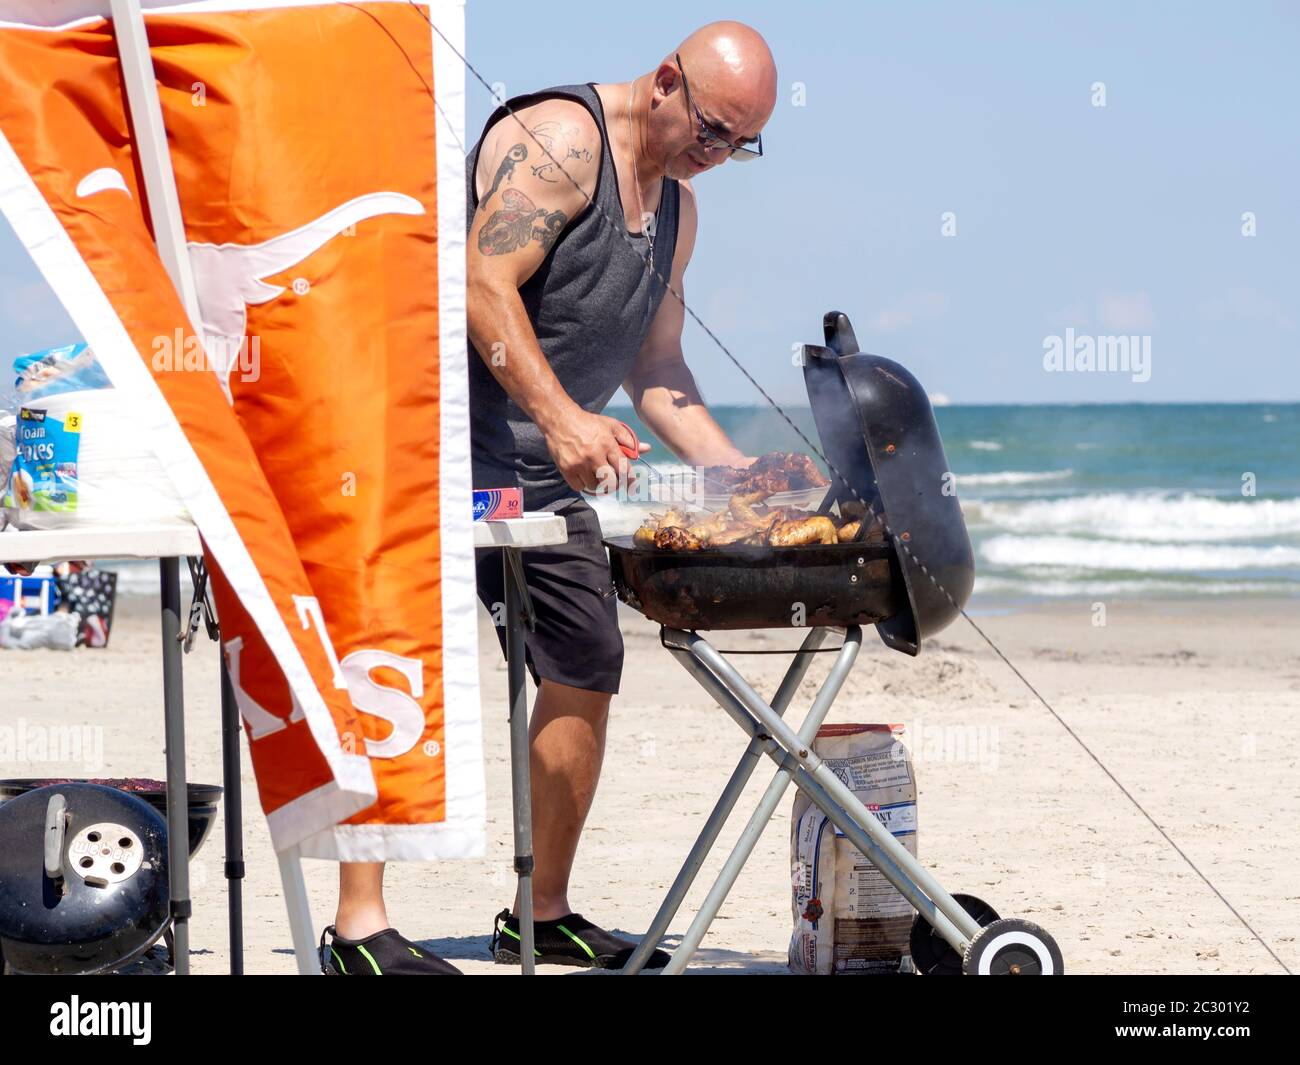 A bald man in sunglasses cooks chicken at a hot, smoky grill on a sunny day at the beach in Port Aransas, Texas USA. Stock Photo